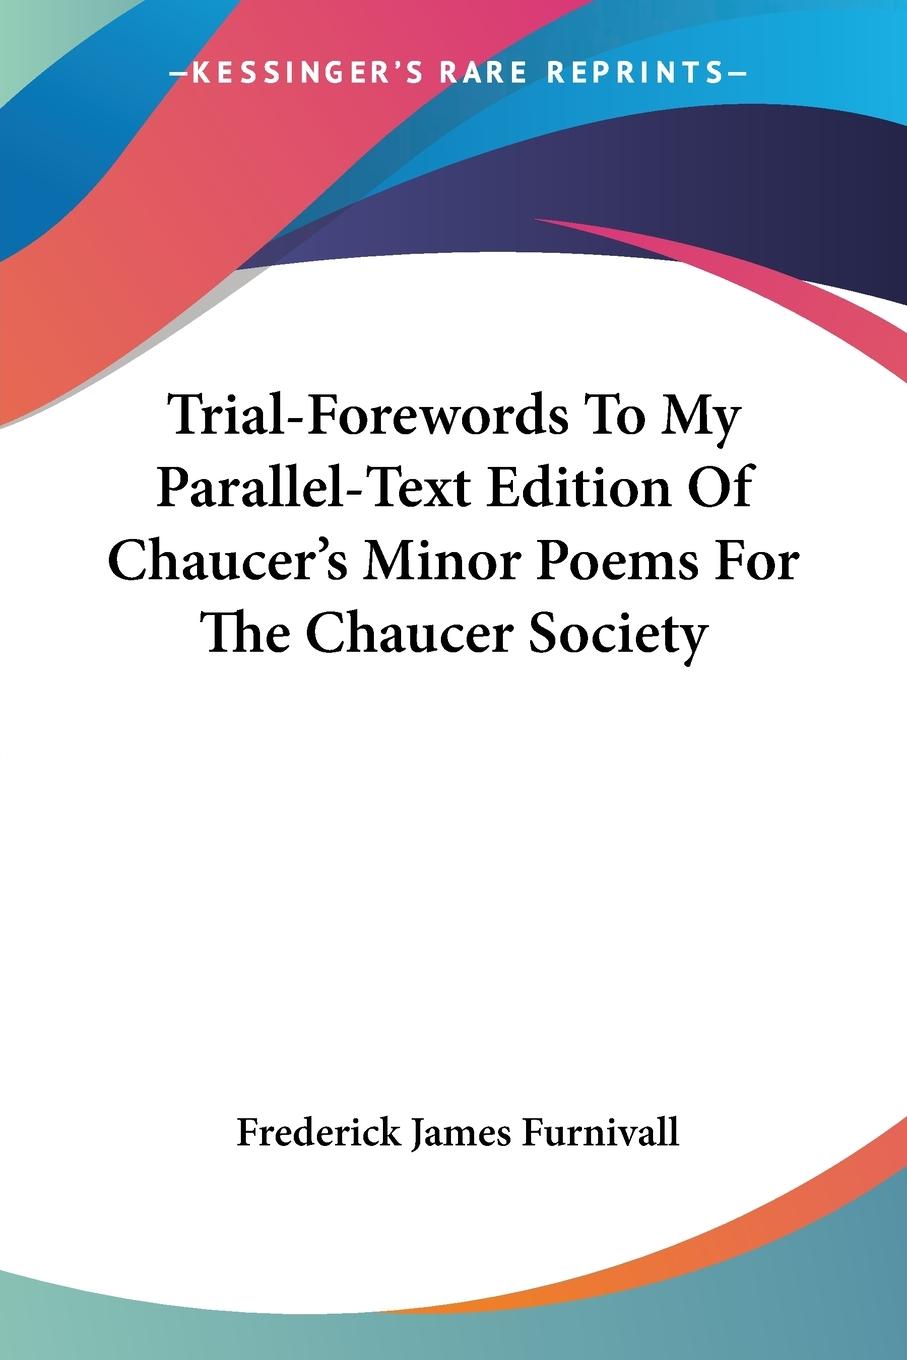 Trial-Forewords To My Parallel-Text Edition Of Chaucer s Minor Poems For The Chaucer Society - Furnivall, Frederick James